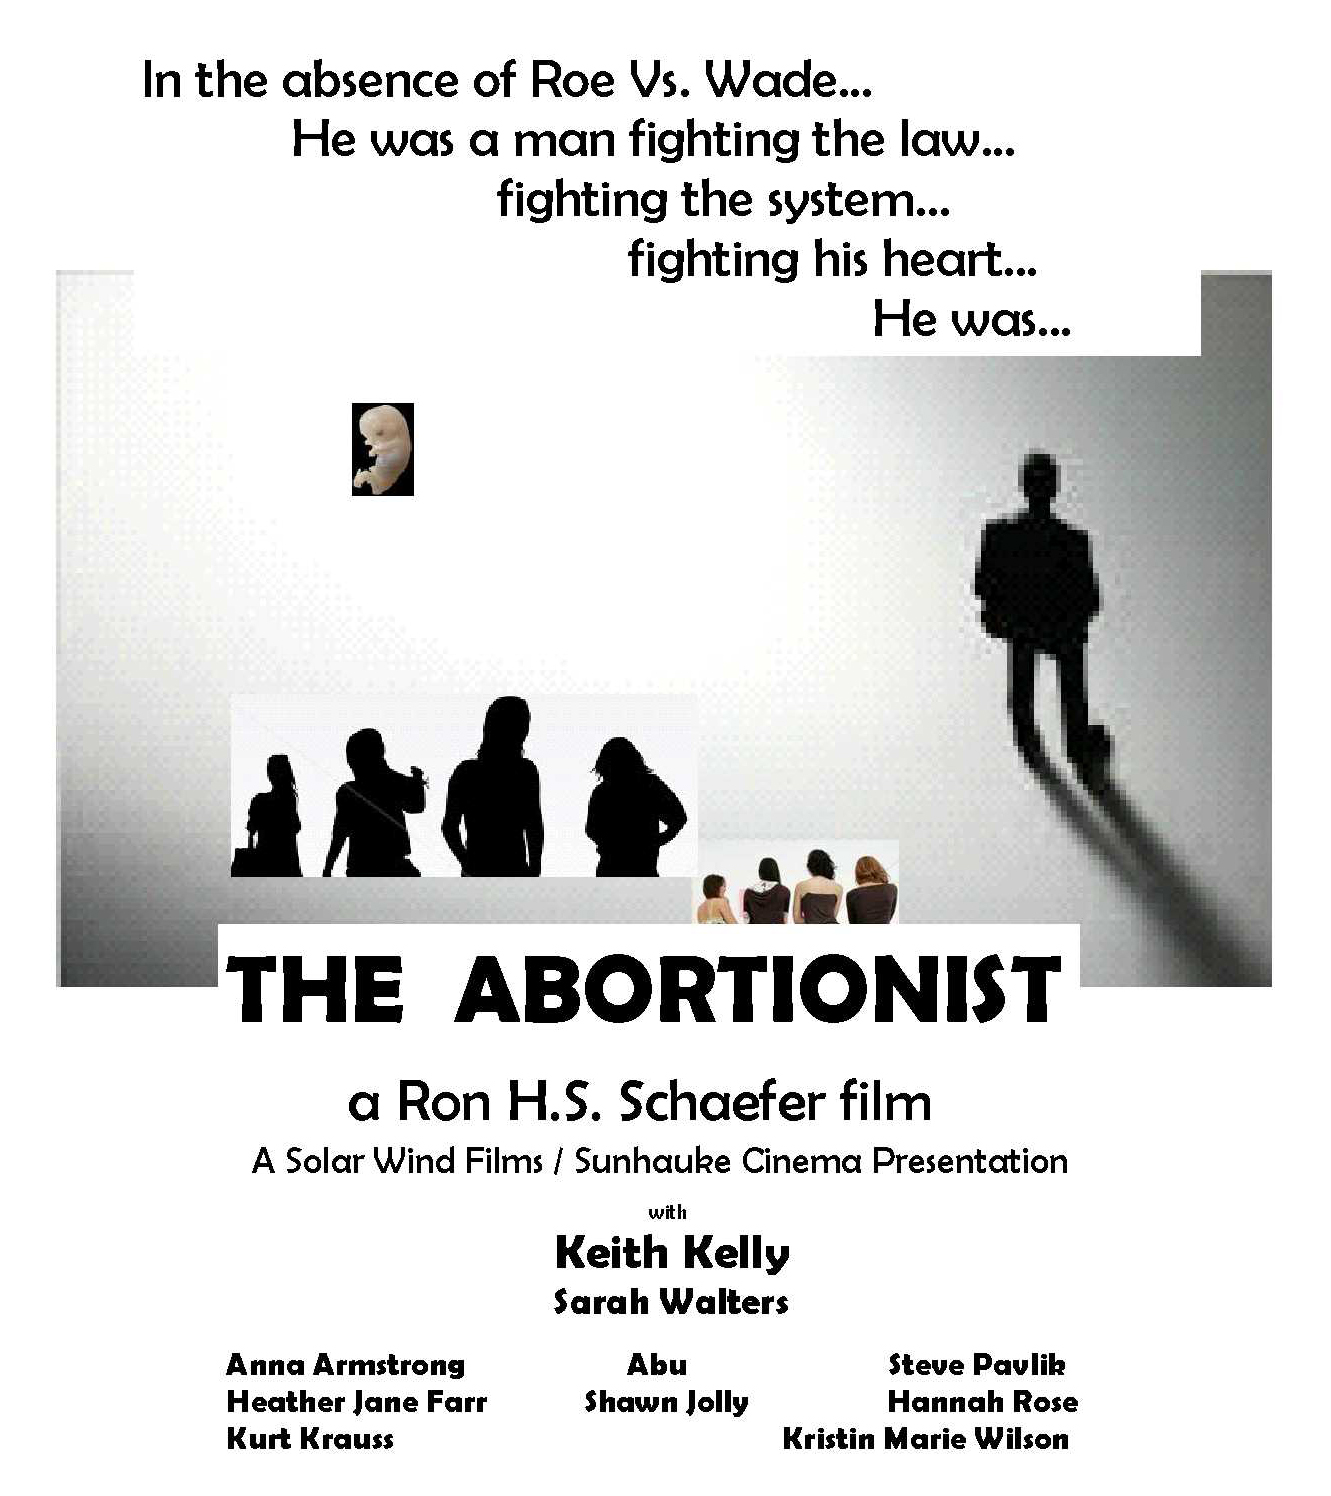 Poster for The Abortionist, starring Keith Kelly as the conflicted doctor.